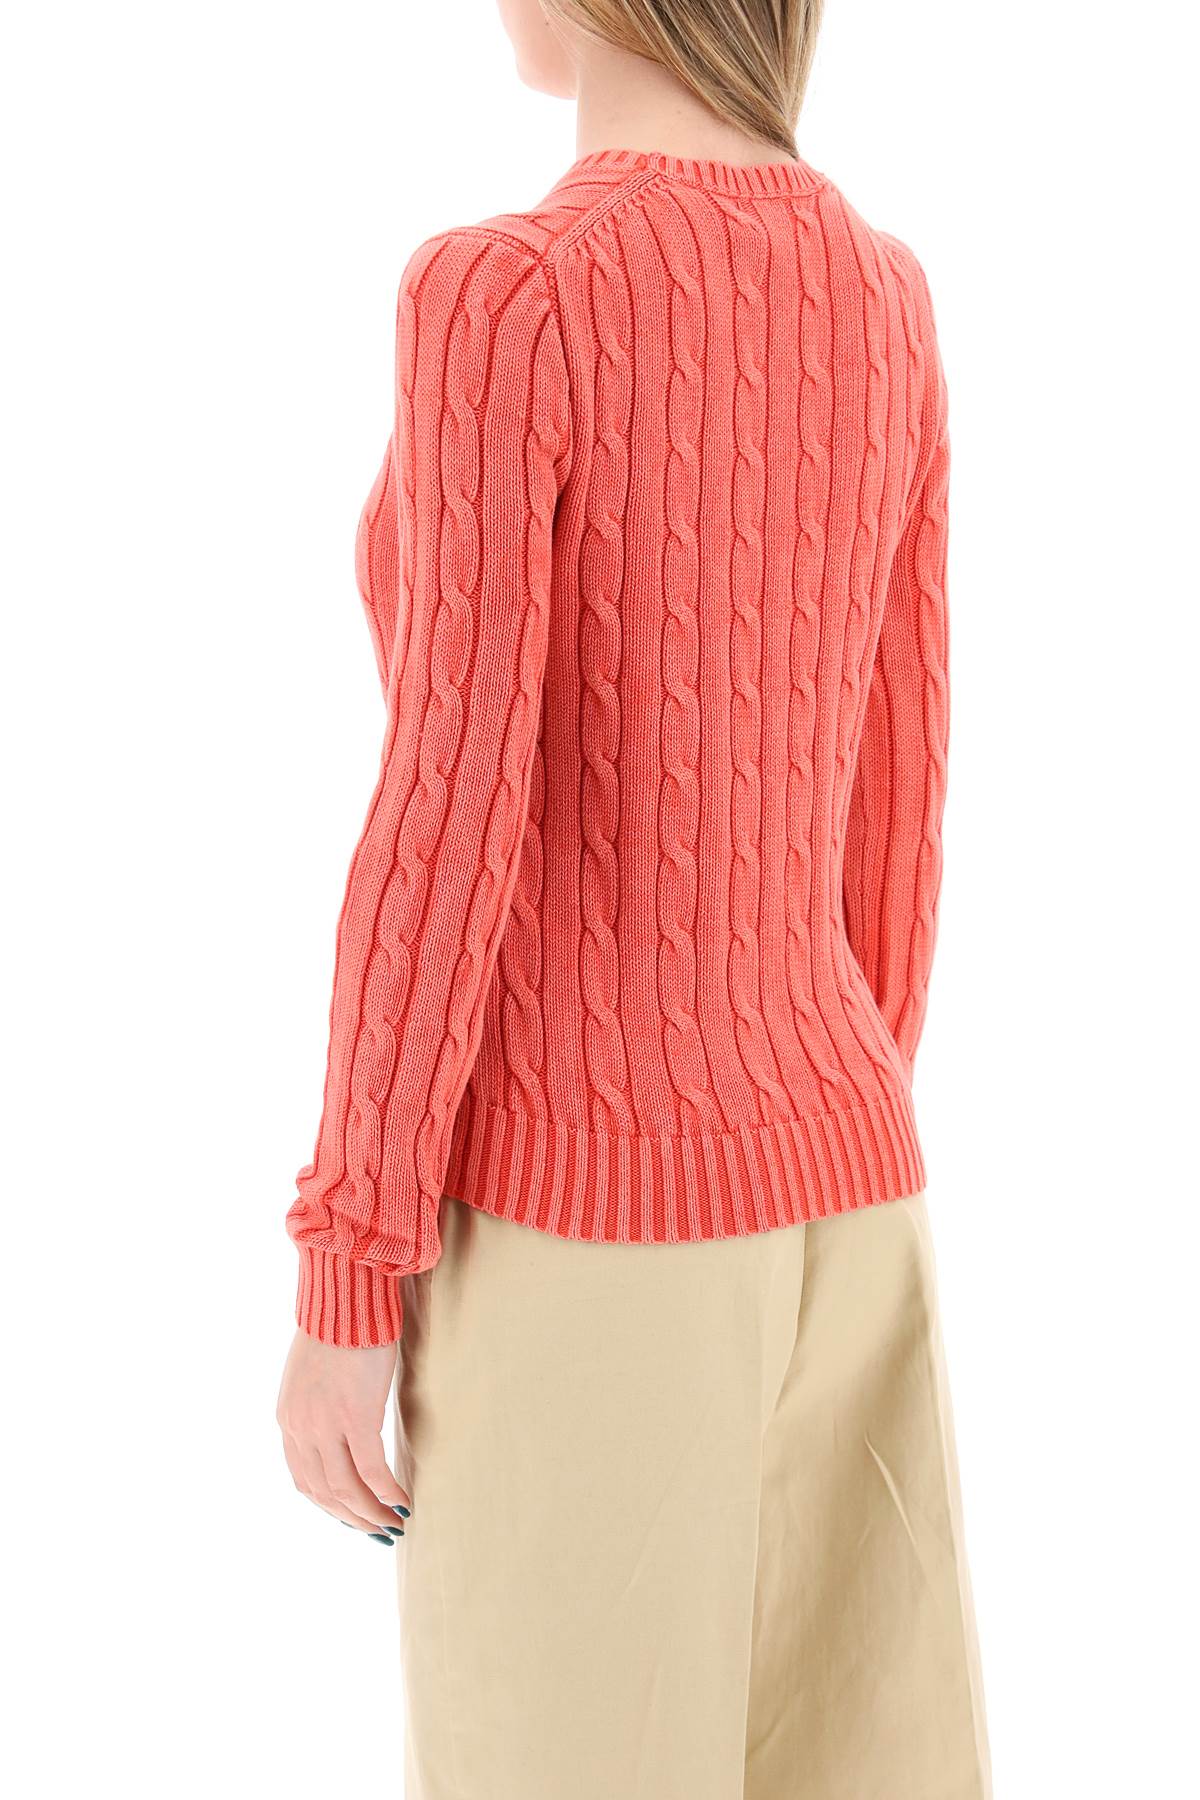 cotton cable knit pullover sweater-2